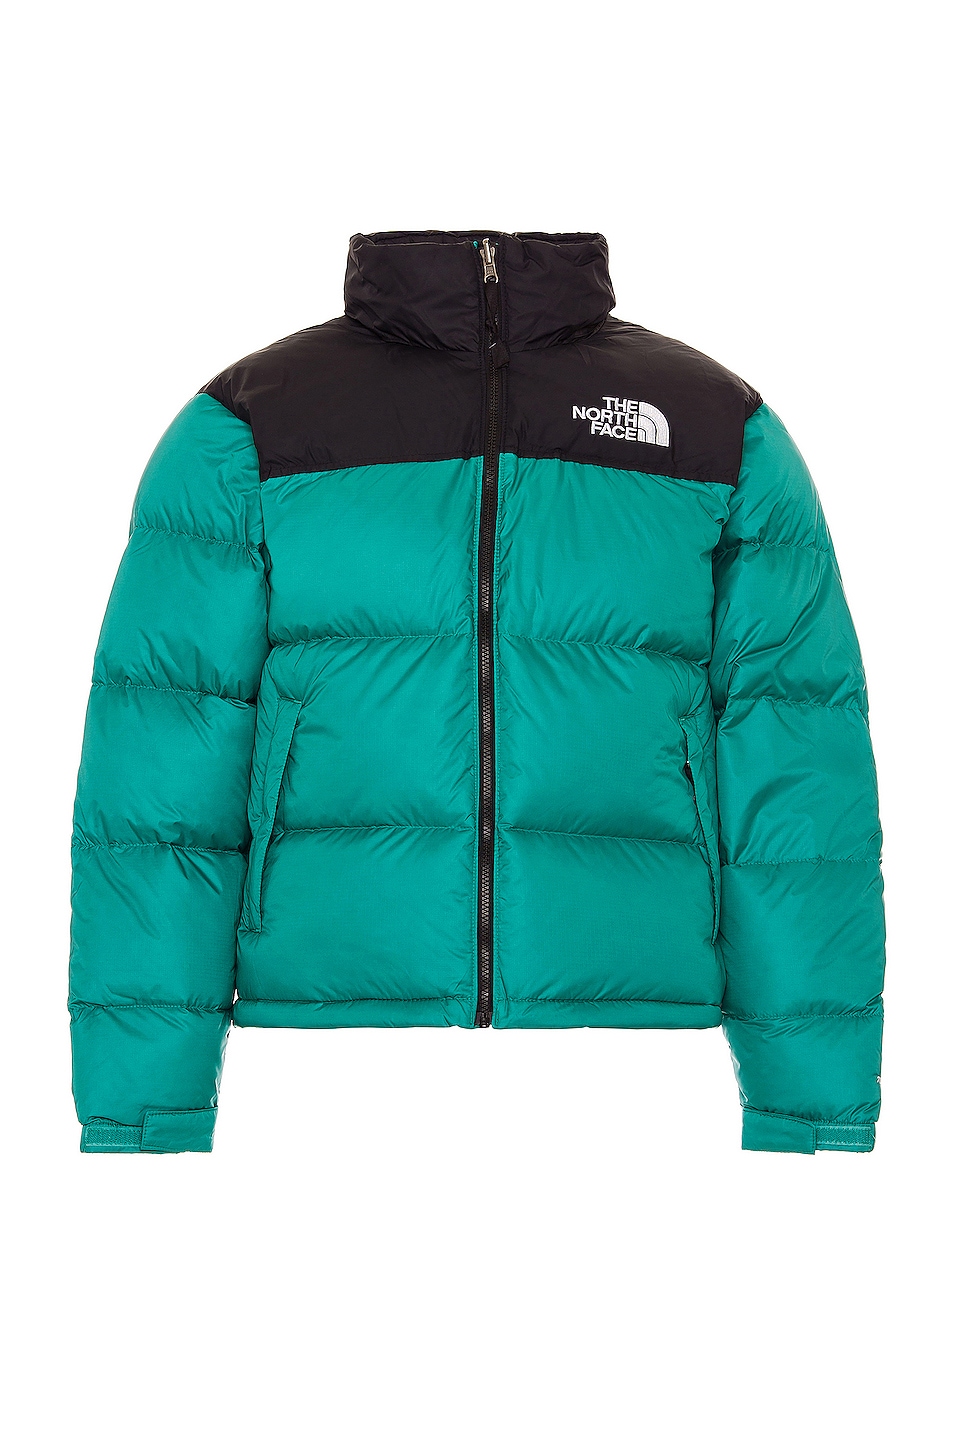 Image 1 of The North Face 1996 Retro Nuptse Jacket in Porcelain Green